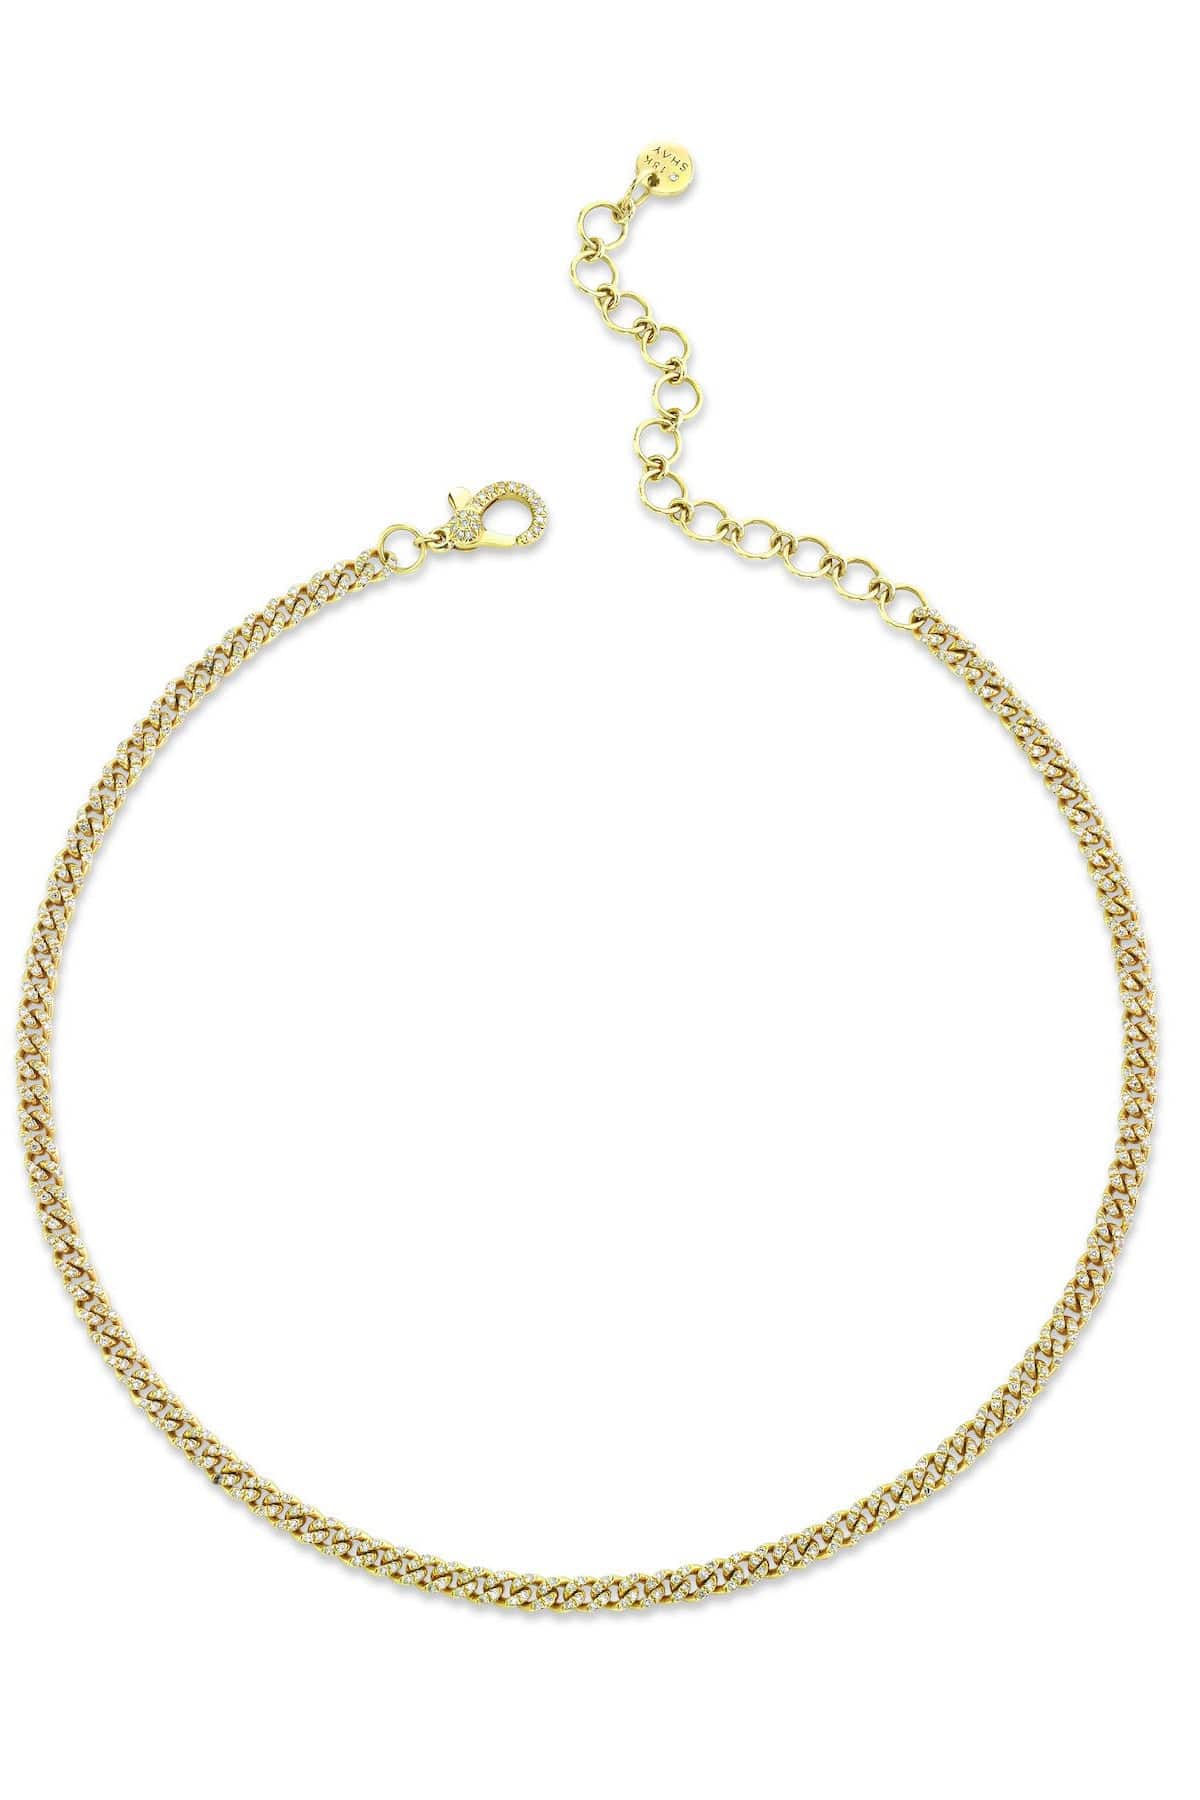 SHAY JEWELRY-Diamond Pave Baby Link Necklace-YELLOW GOLD